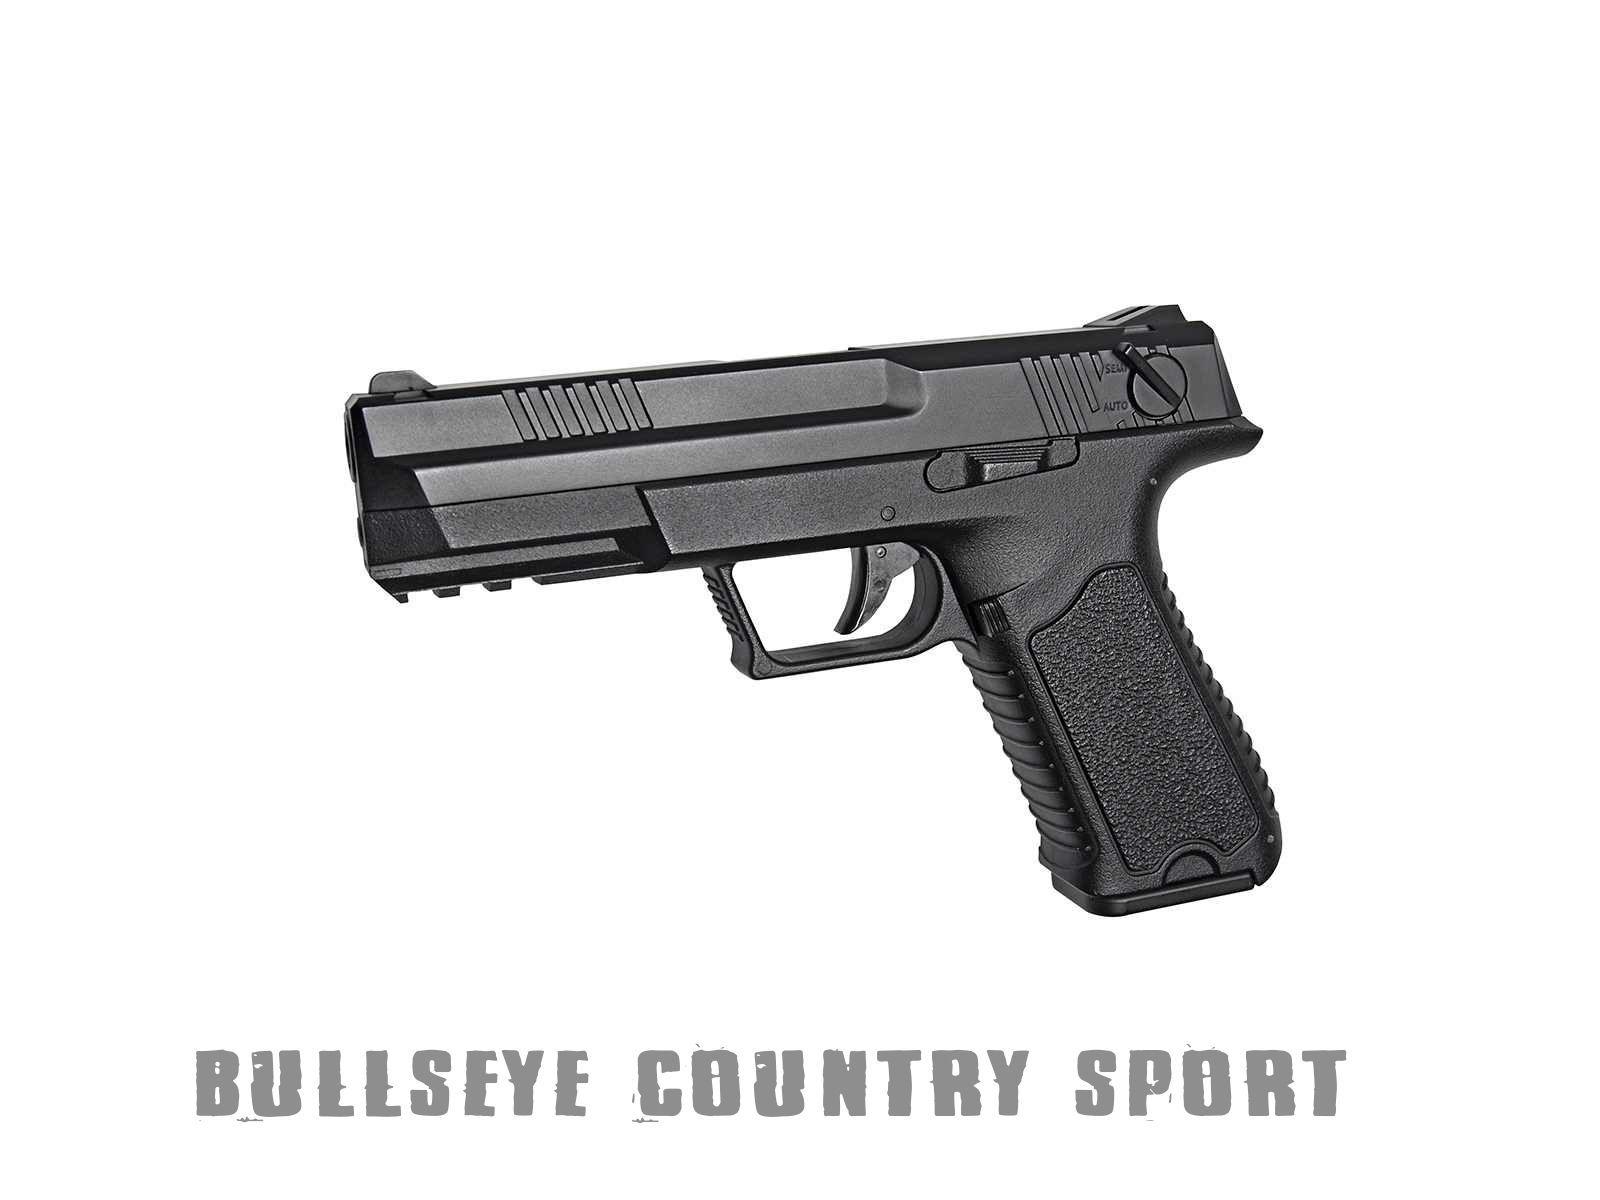 Black and White Airsoft Logo - ASG Challenger XP17 Airsoft Electric Pistol Black